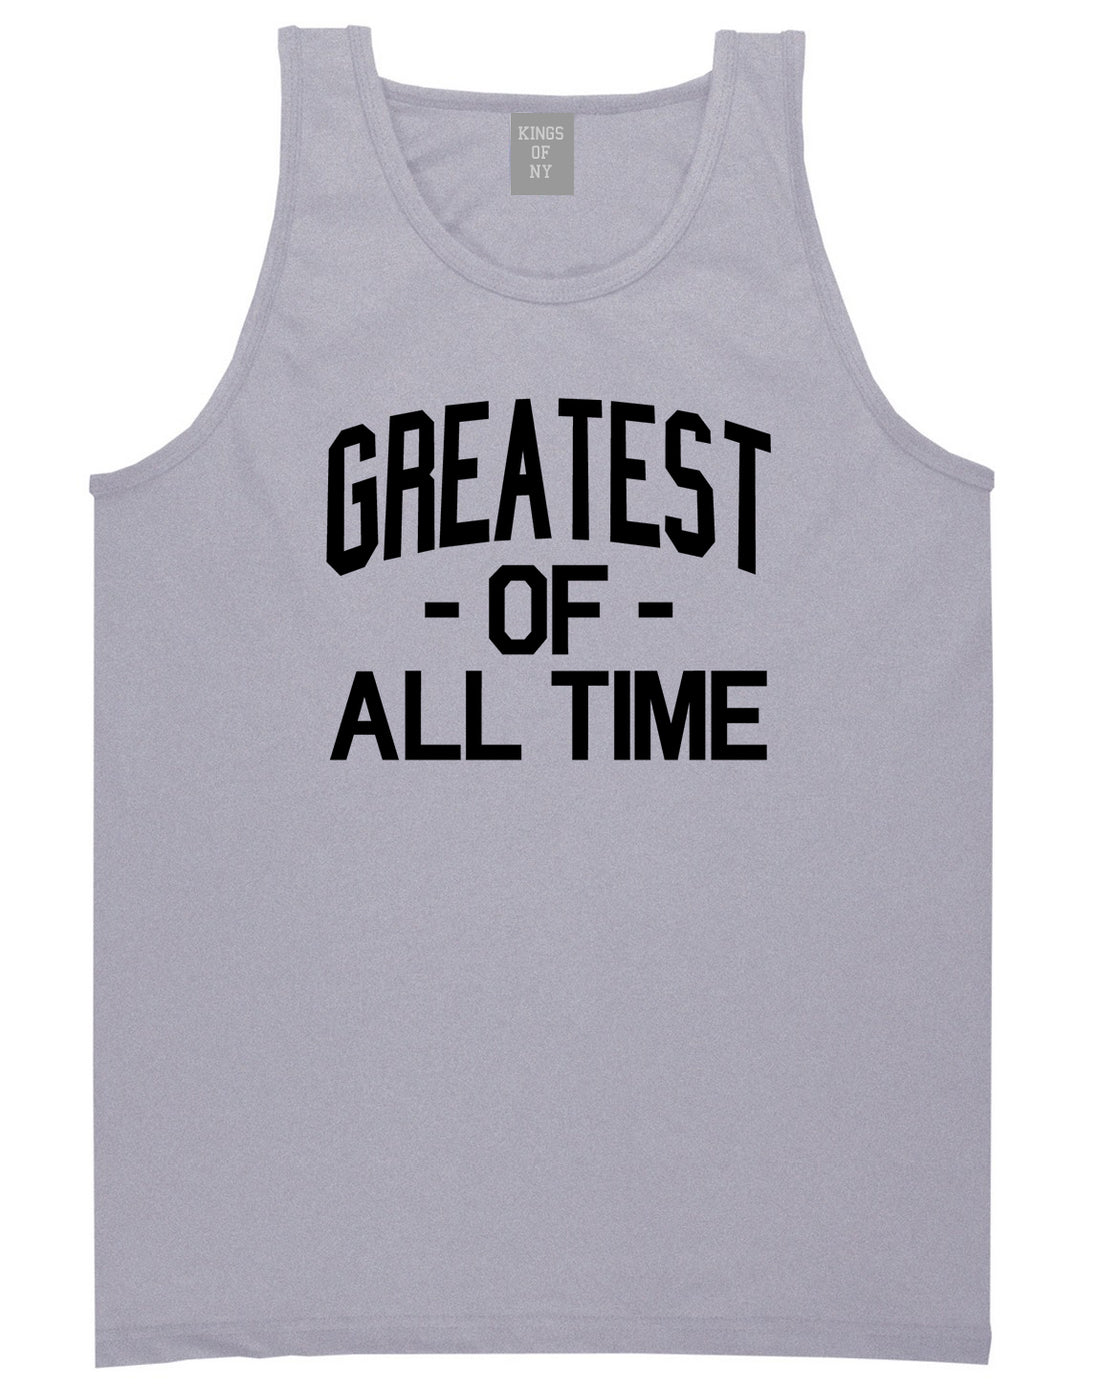 Greatest Of All Time GOAT Mens Tank Top Shirt Grey by Kings Of NY